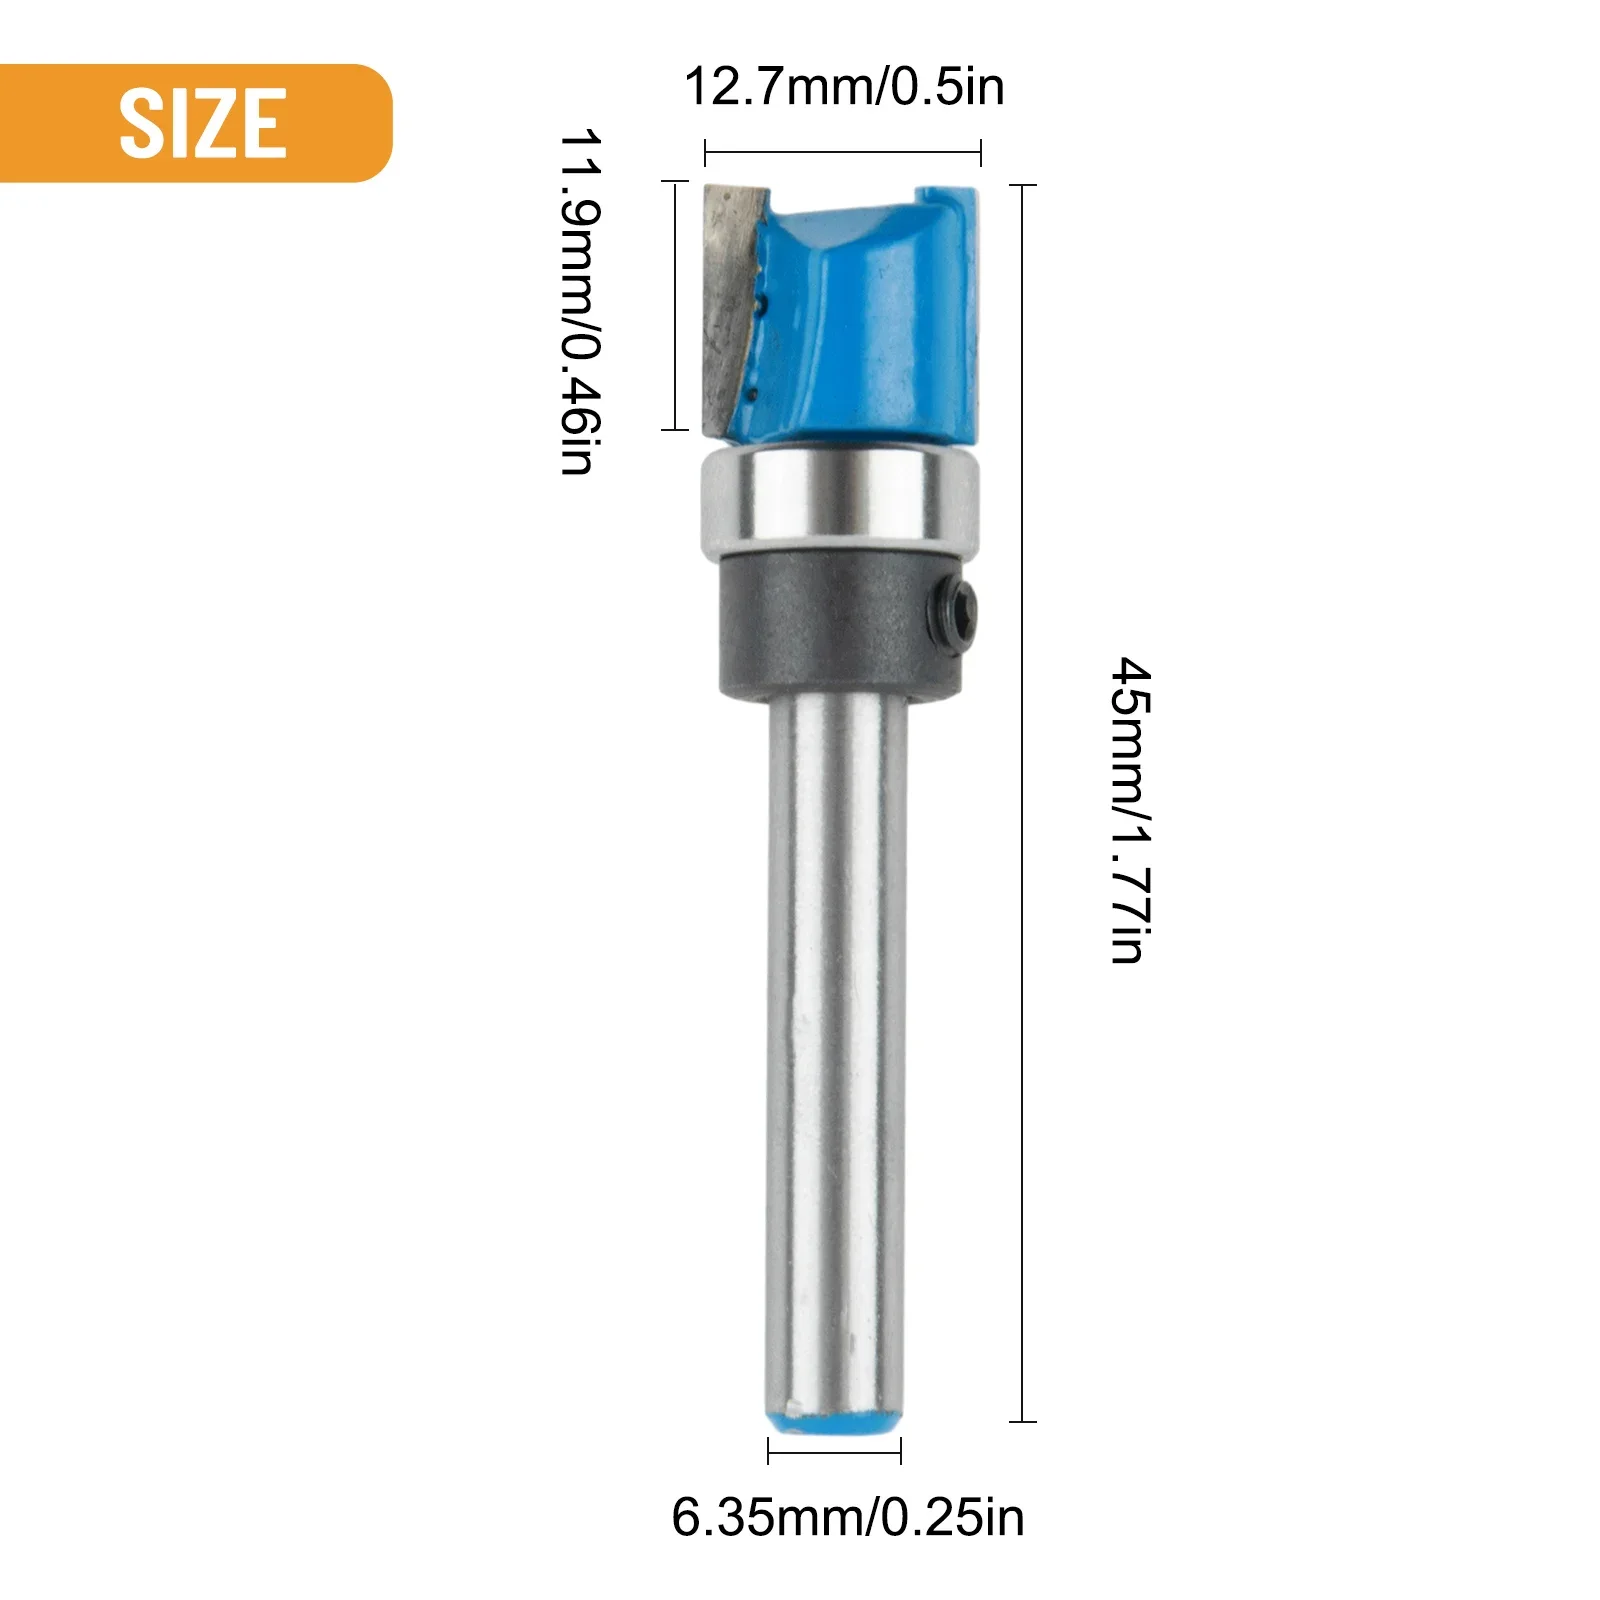 

Straight Flute Flush Trim Pattern Router Bit Cutter Top Bearing 1/4\" Shank For Combined Plunge-Cutting 45mm Length